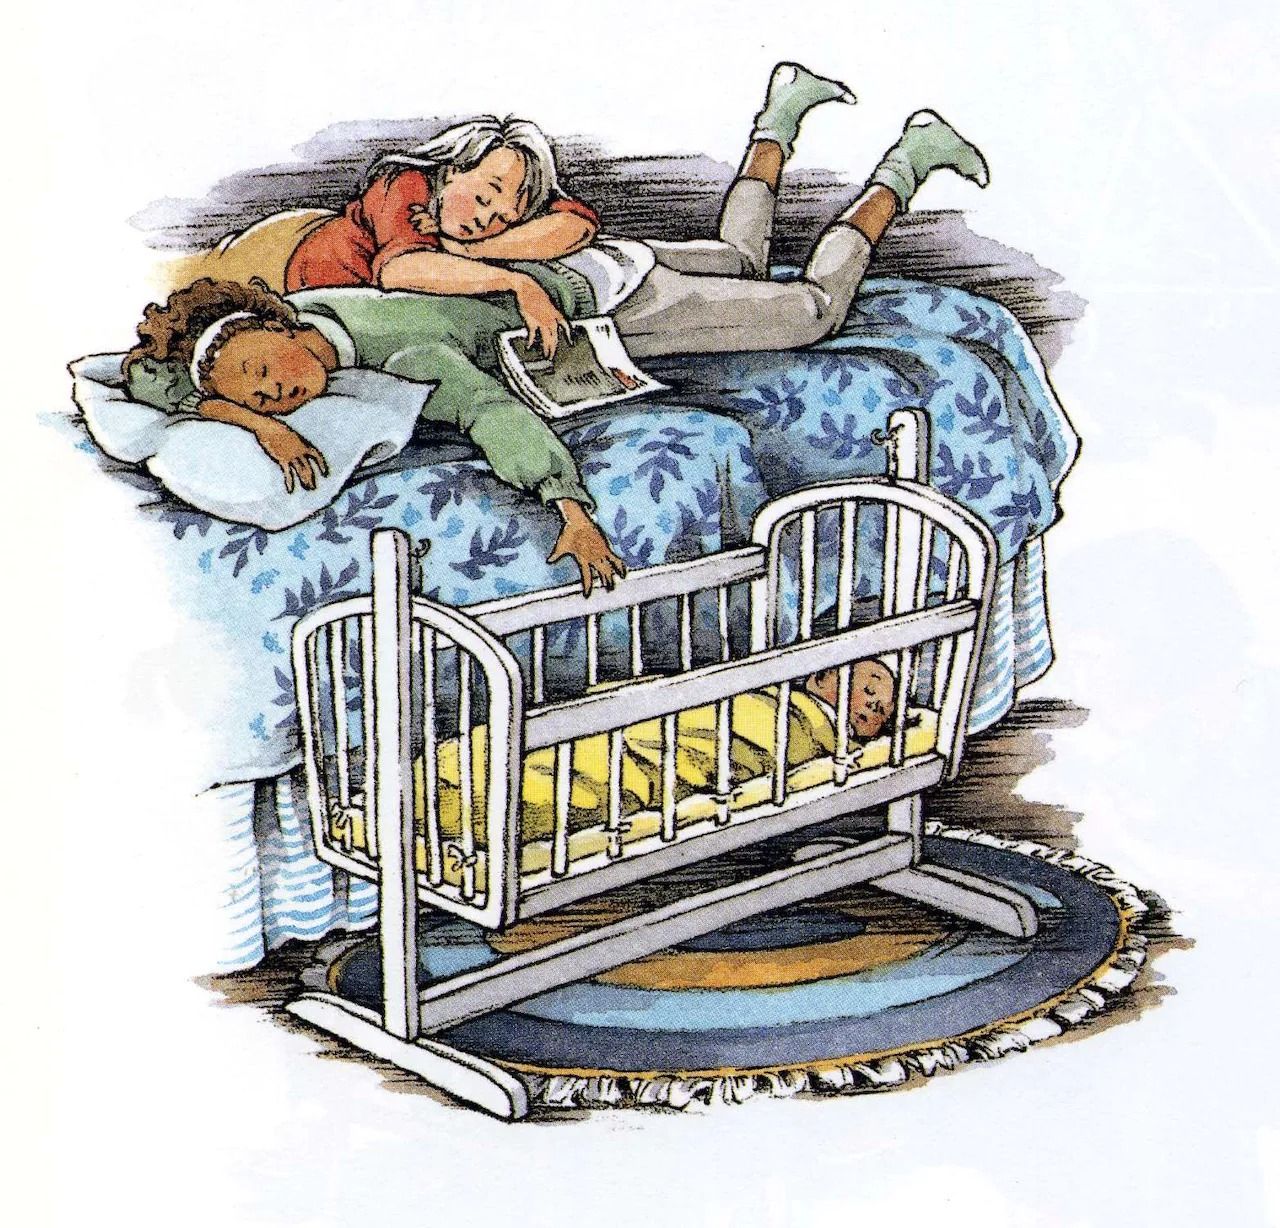 an illustration from Everywhere Babies showing two women who have fallen asleep while rocking a baby in a crib beside the bed